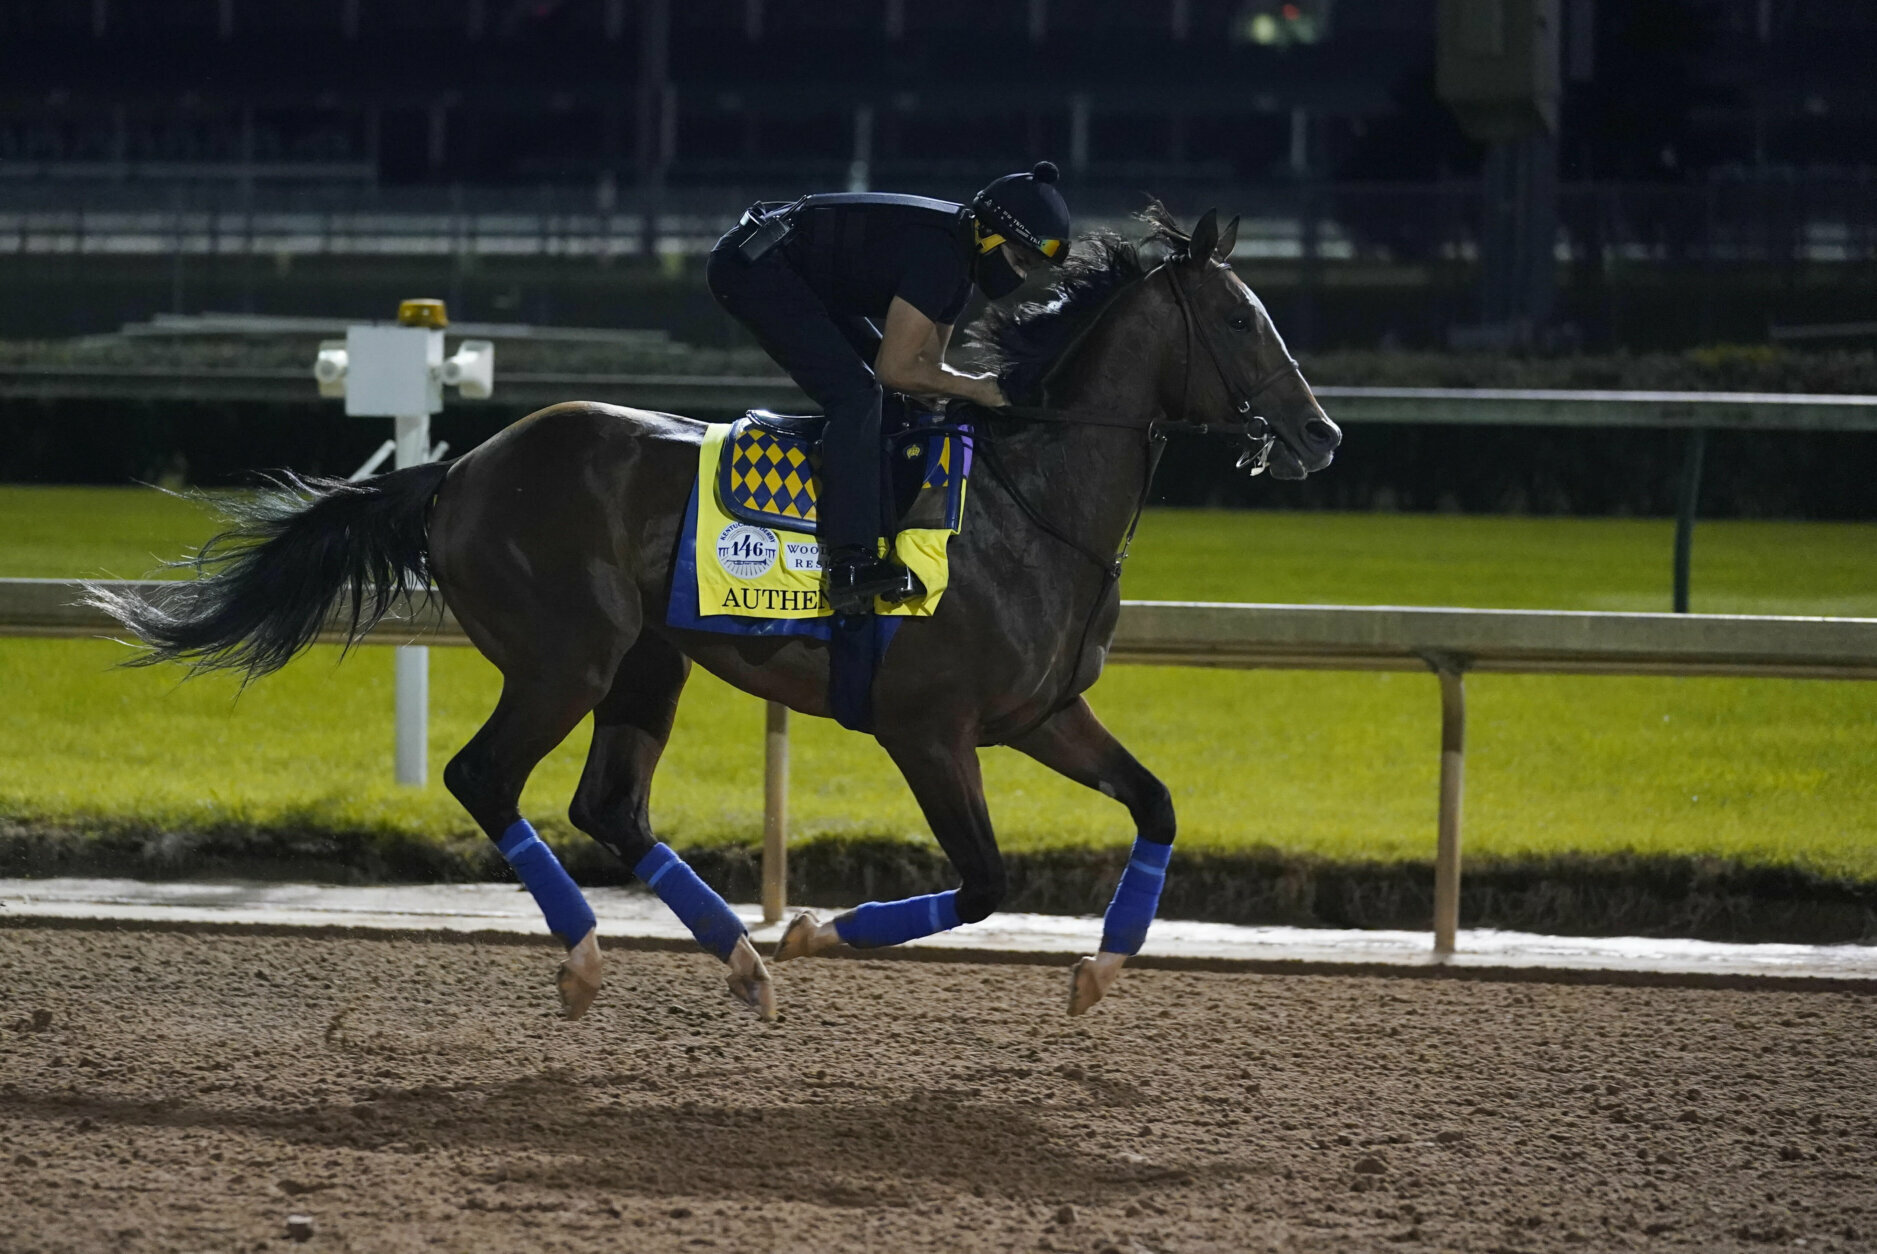 Kentucky Derby entry Authentic runs during a workout at Churchill Downs, Friday, Sept. 4, 2020, in Louisville, Ky. The Kentucky Derby is scheduled for Saturday, Sept. 5th. (AP Photo/Darron Cummings)